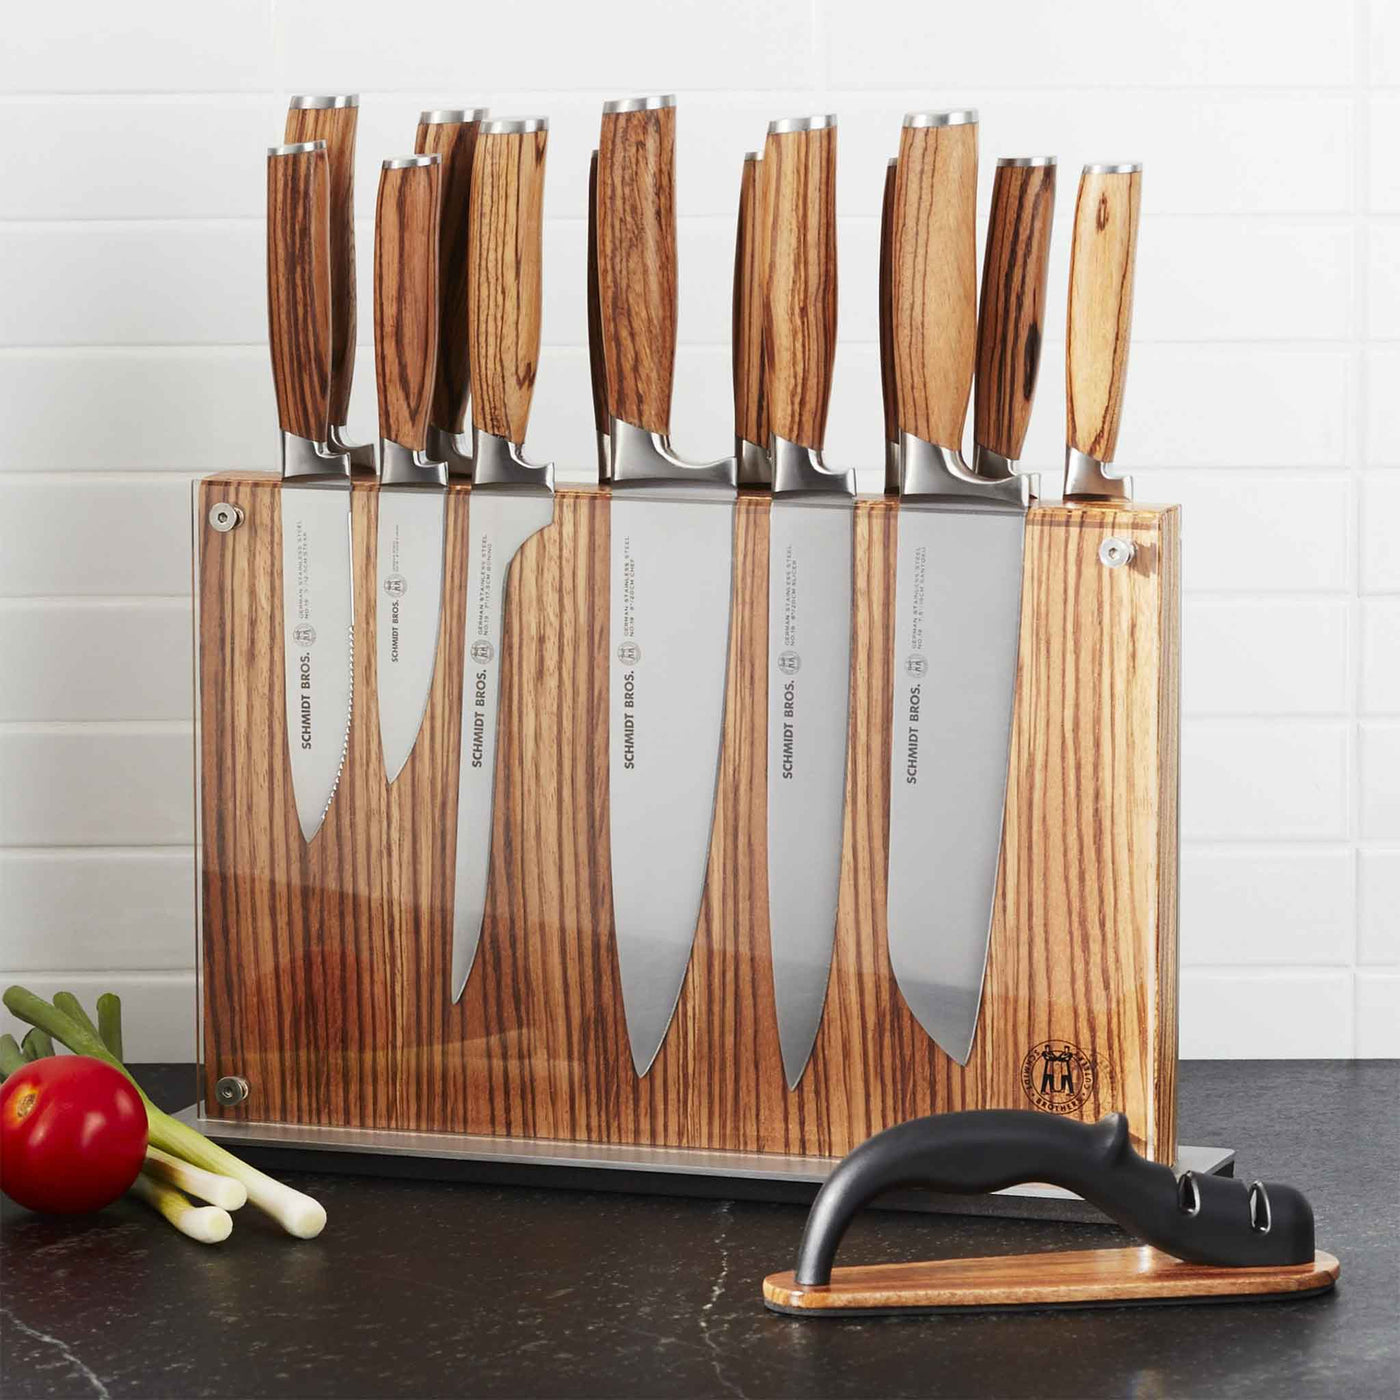 Schmidt Brothers Kitchen Cutlery Schmidt Brothers - Zebra Wood, 15-Piece Knife Set, High-Carbon Stainless Steel Cutlery with Zebra Wood Magnetic Knife Block and Knife Sharpener